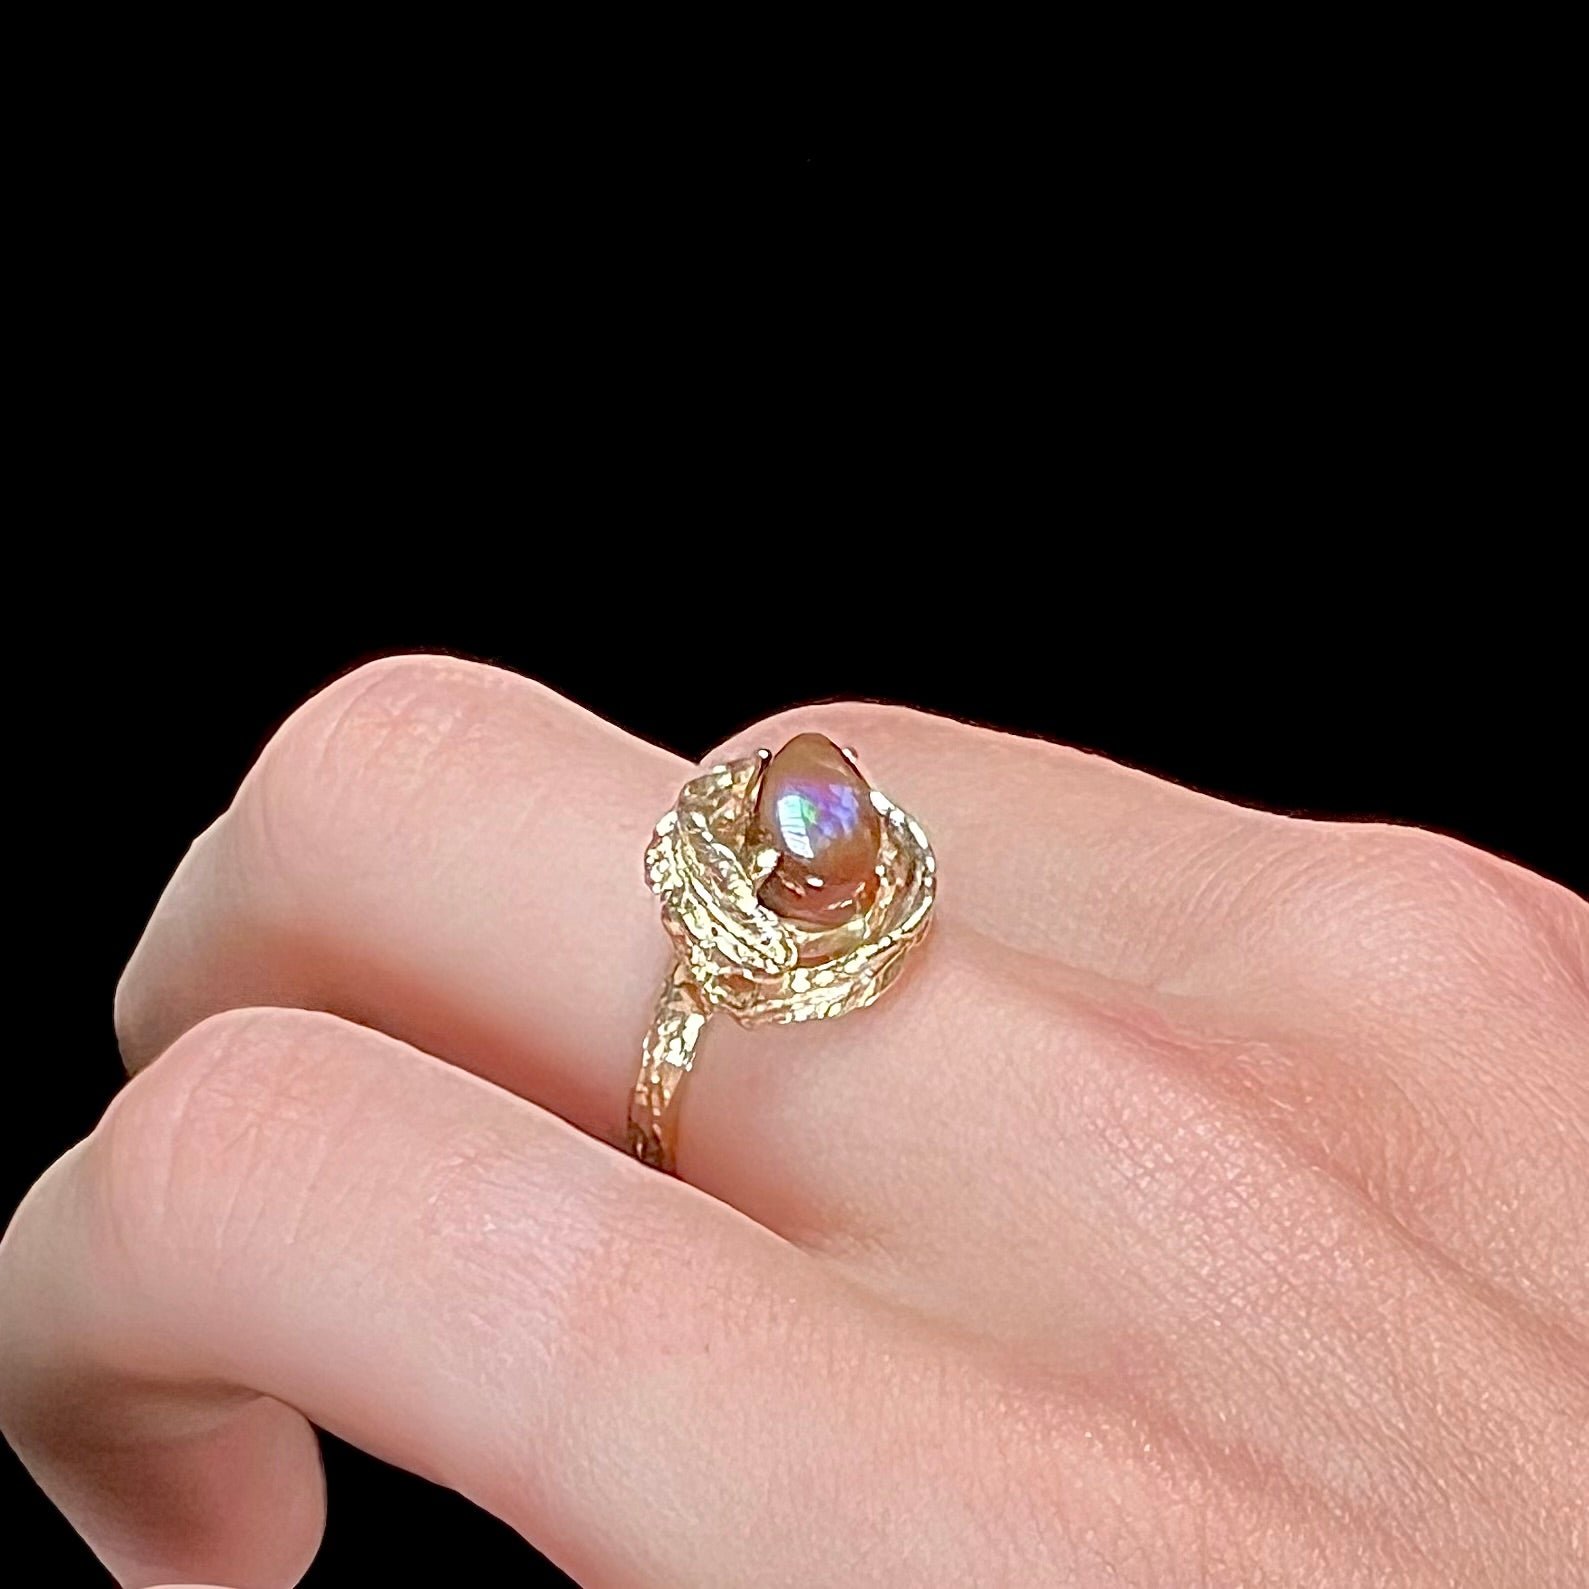 A ladies' organic style yellow gold ring set with a pear shaped cabochon cut Mexican fire agate.  The stone shines green and purple.